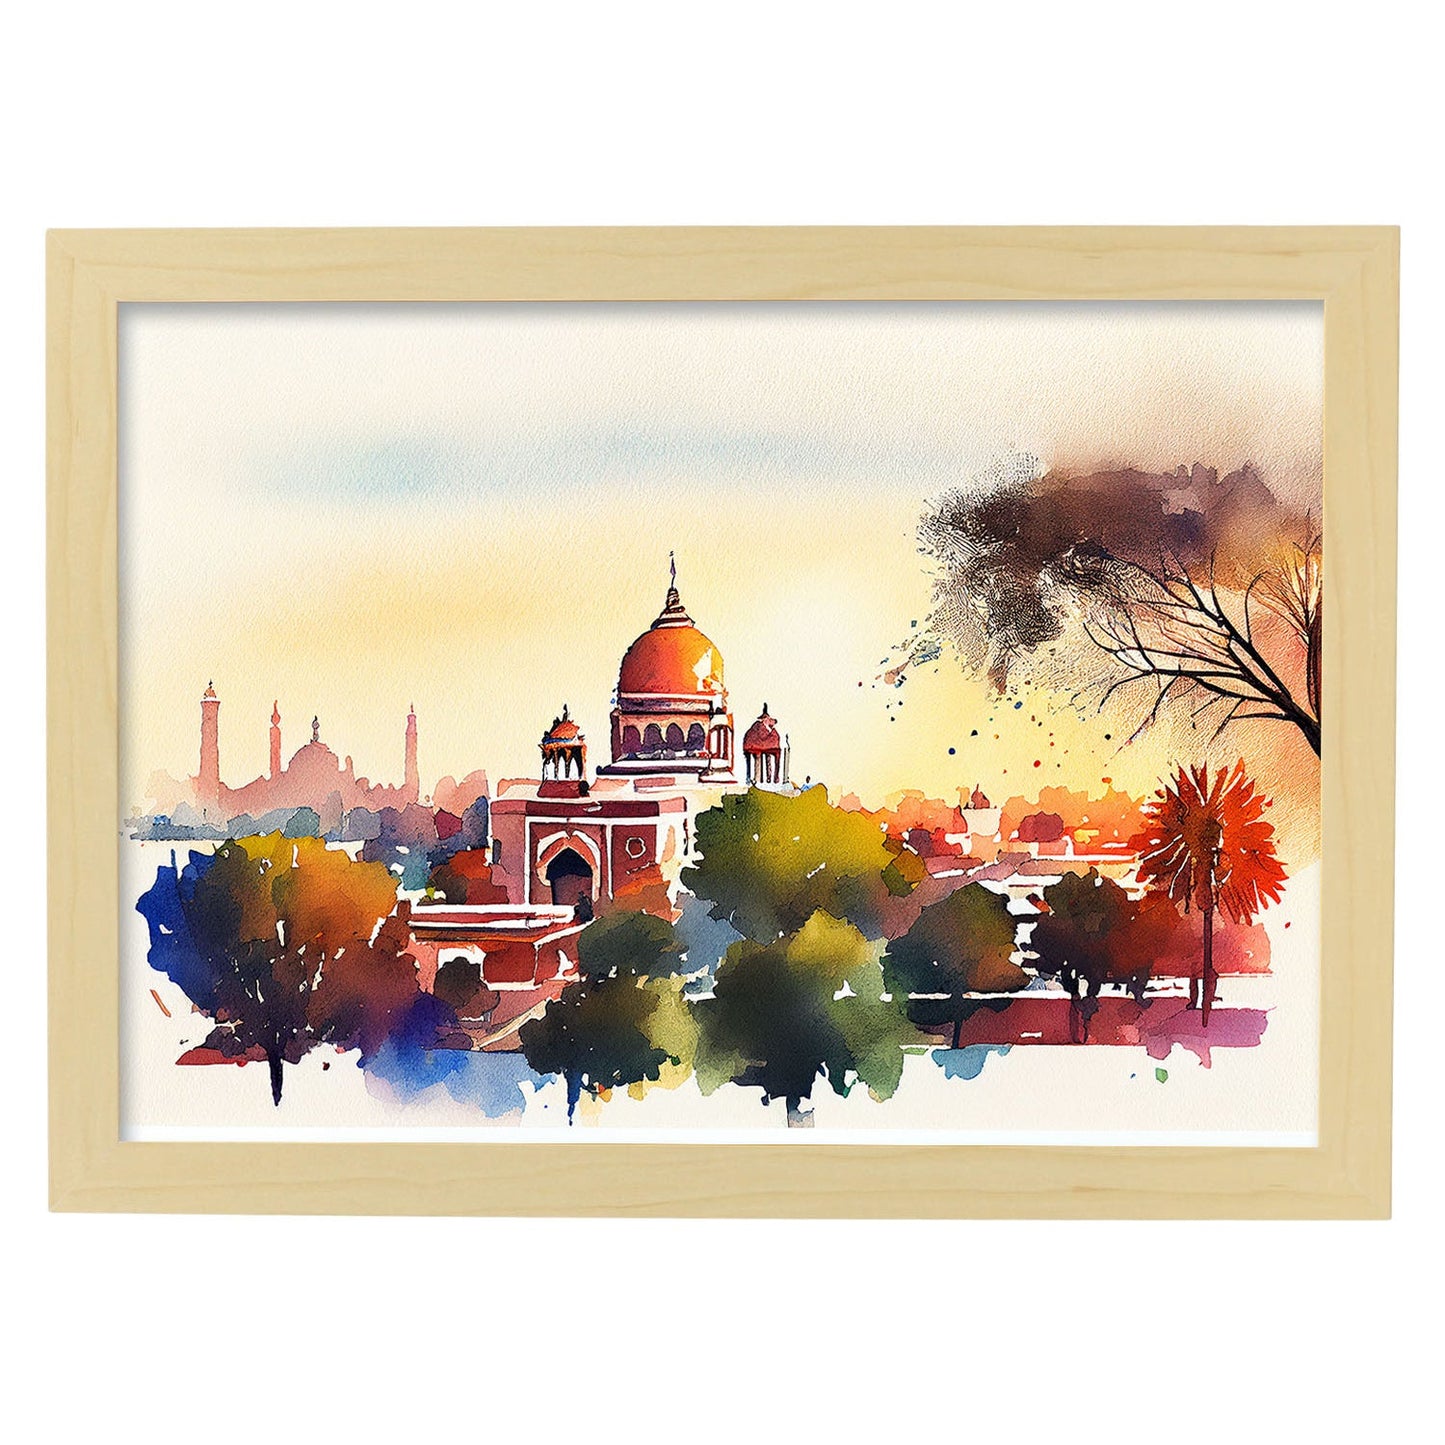 Nacnic watercolor of a skyline of the city of New Delhi. Aesthetic Wall Art Prints for Bedroom or Living Room Design.-Artwork-Nacnic-A4-Marco Madera Clara-Nacnic Estudio SL